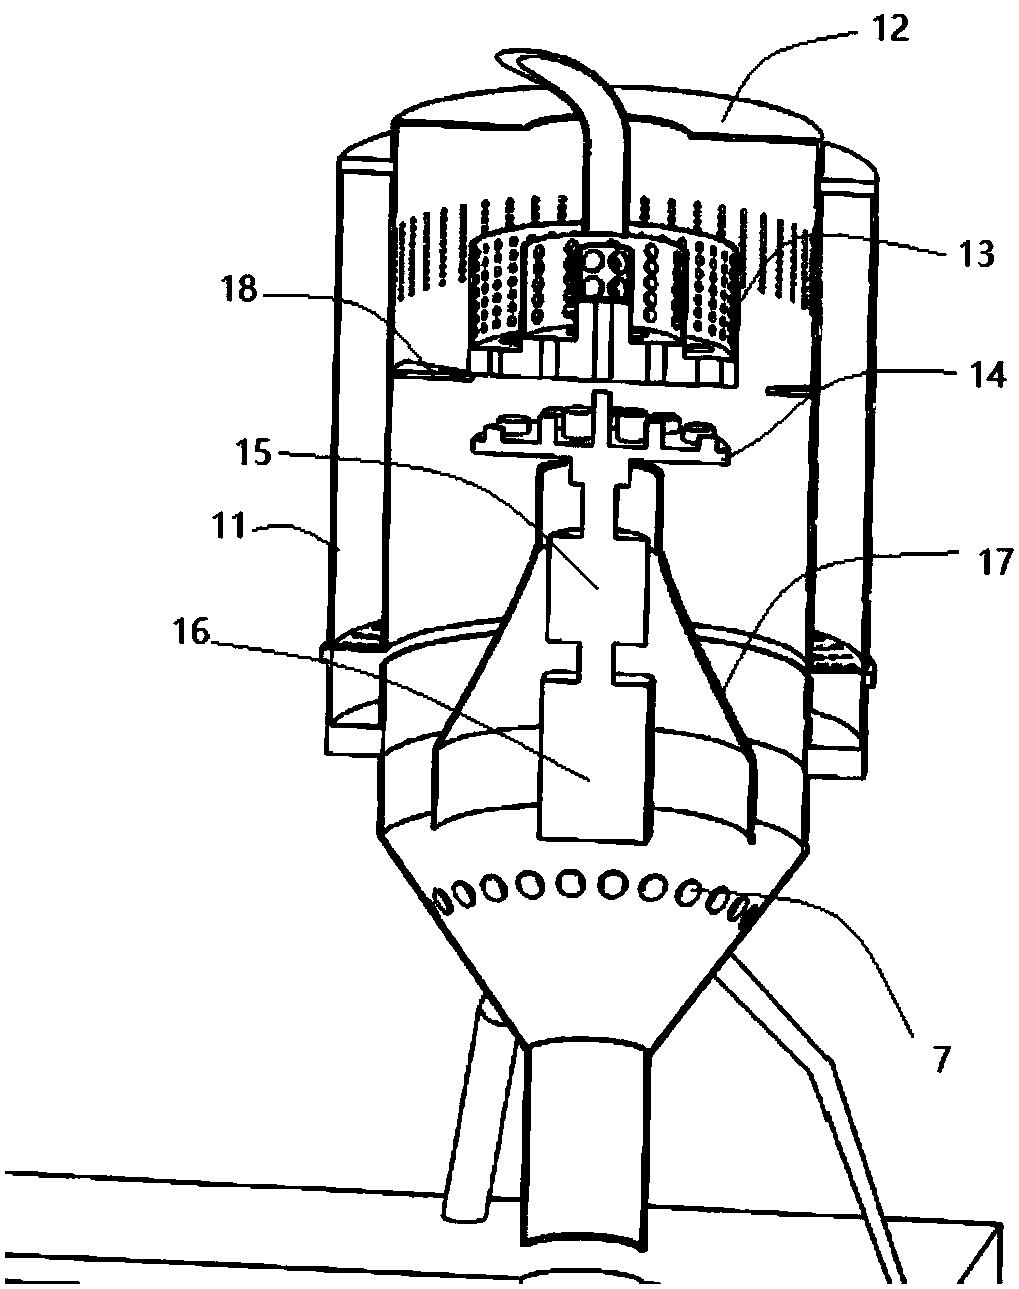 Centrifugal negative-pressure grain screening agricultural machinery device and method